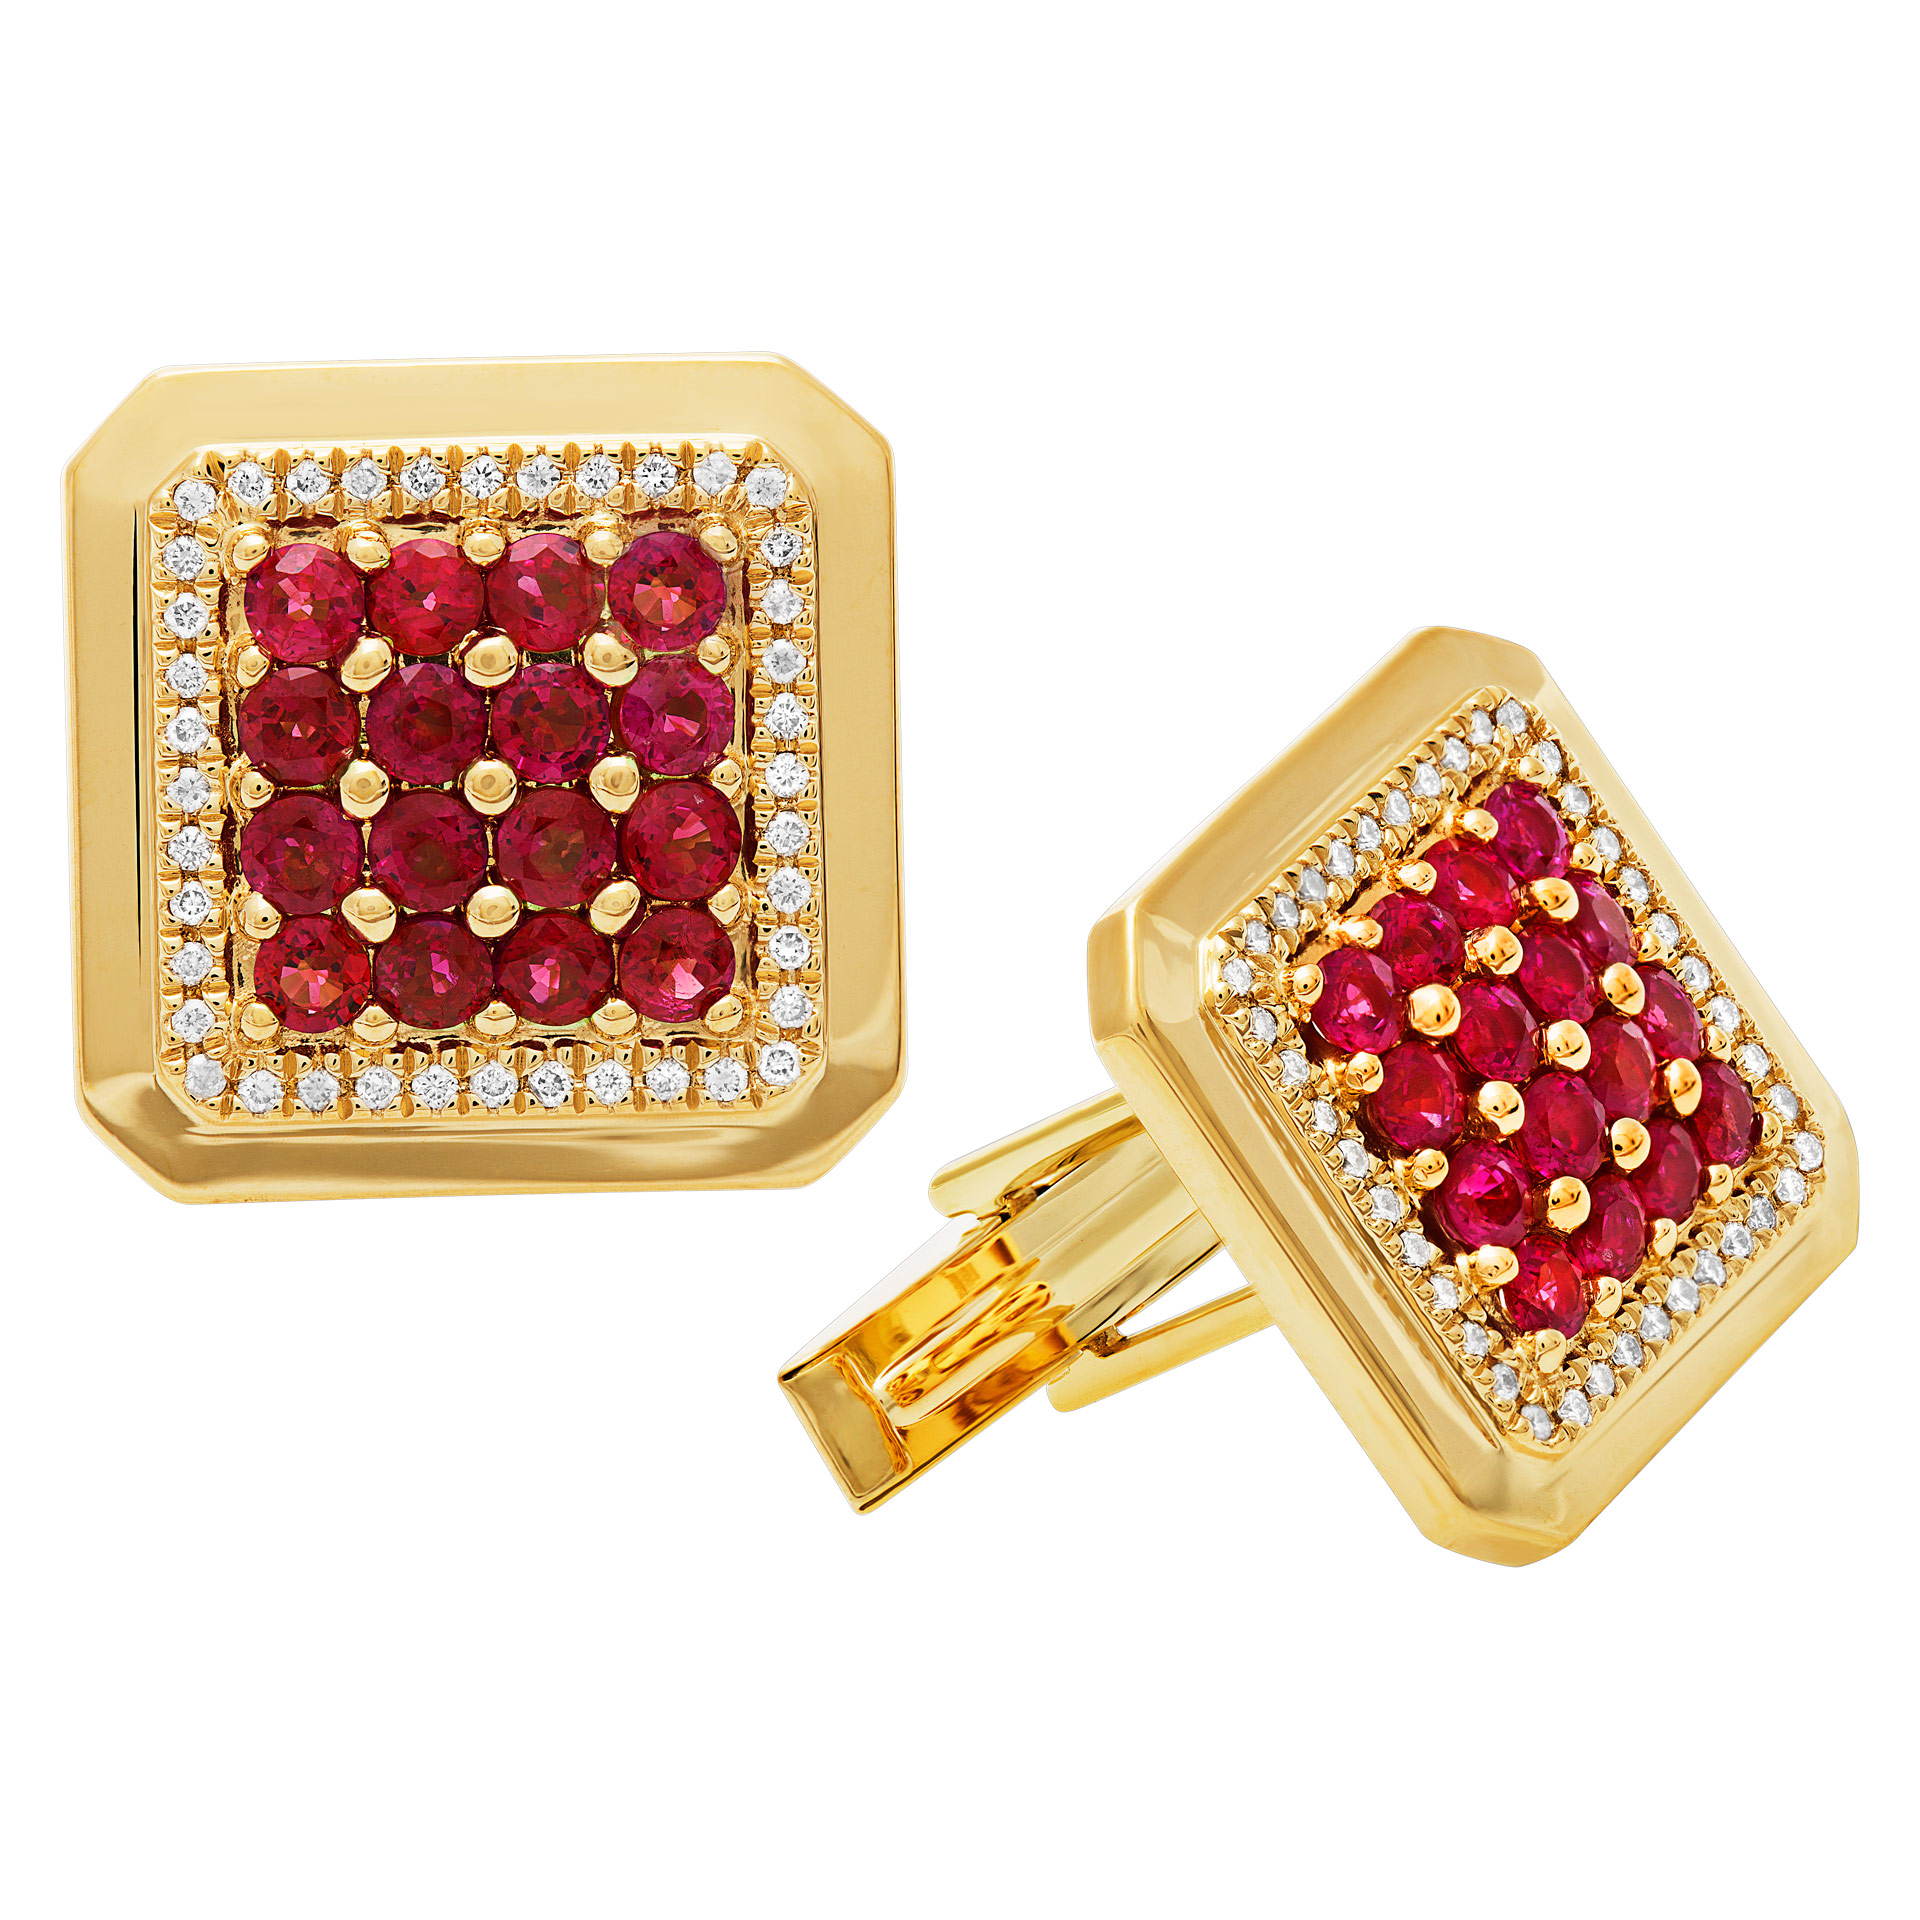 Ruby & diamond cufflinks in 18k yellow gold. 3.20 carats in rubies image 2